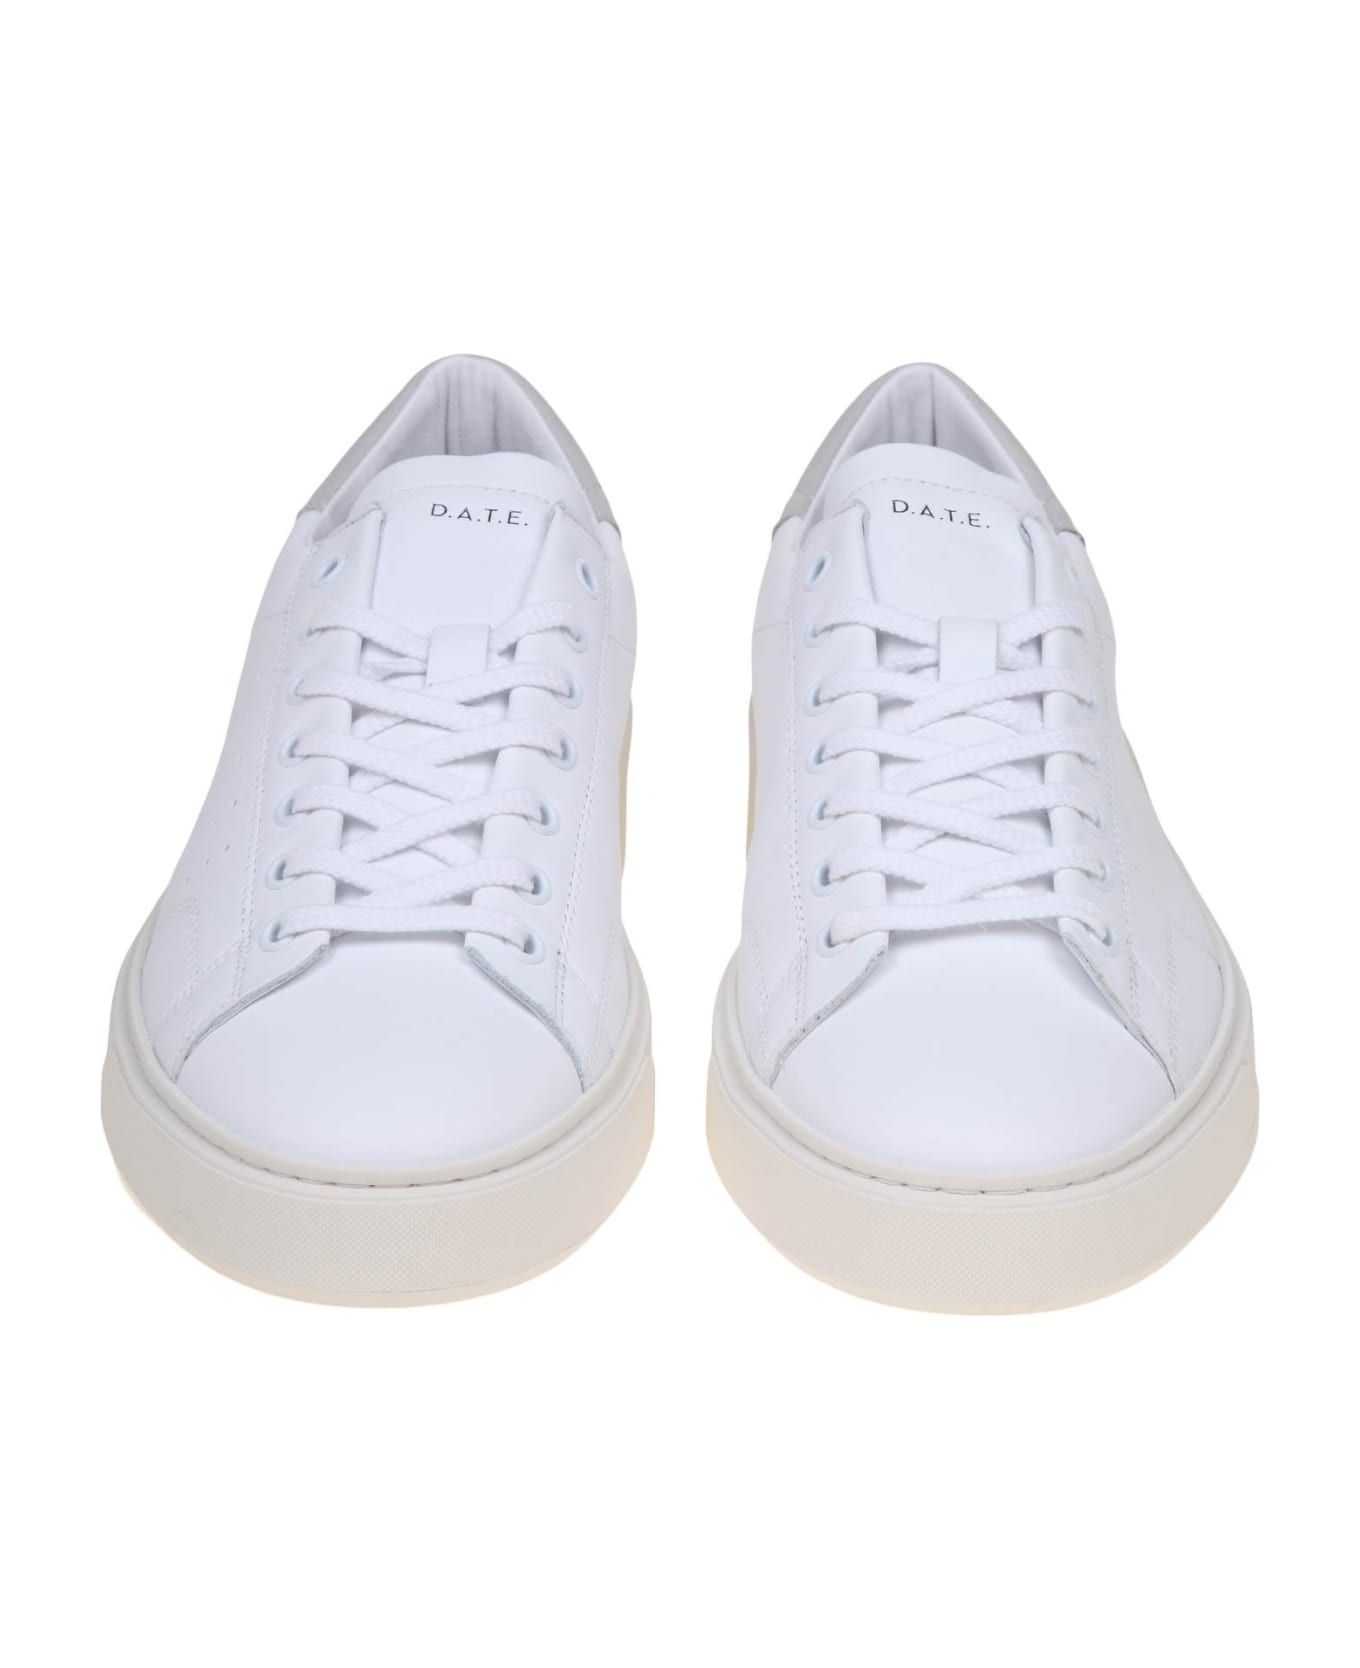 D.A.T.E. Levante In White And Gray Leather - White/Grey スニーカー